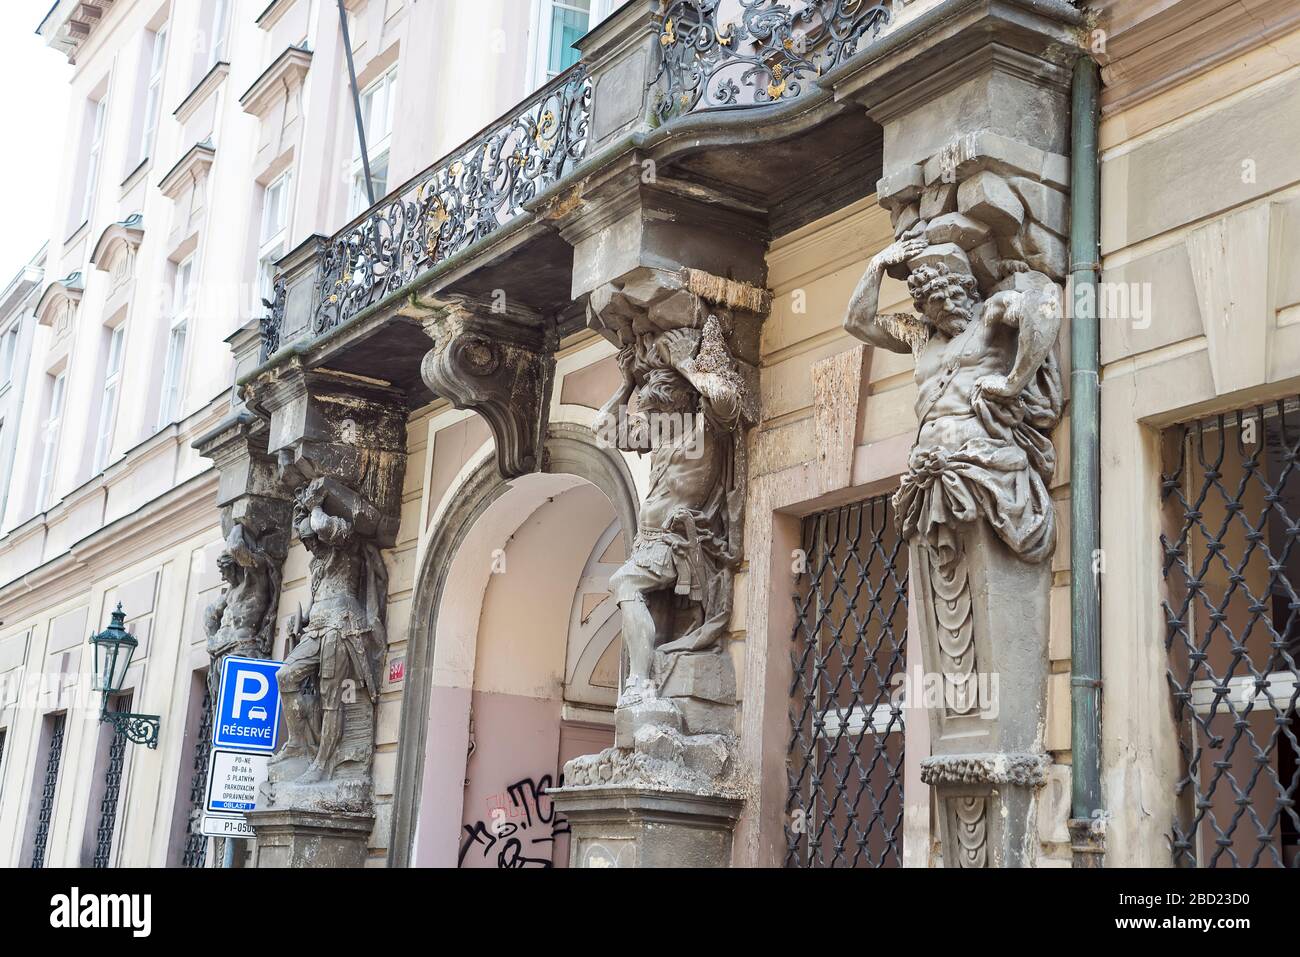 Prague, Czech Republic - 17.07.2018. Architectural details of historic facade with stone atlantes holding a balcony of old-fashioned building in Pragu Stock Photo